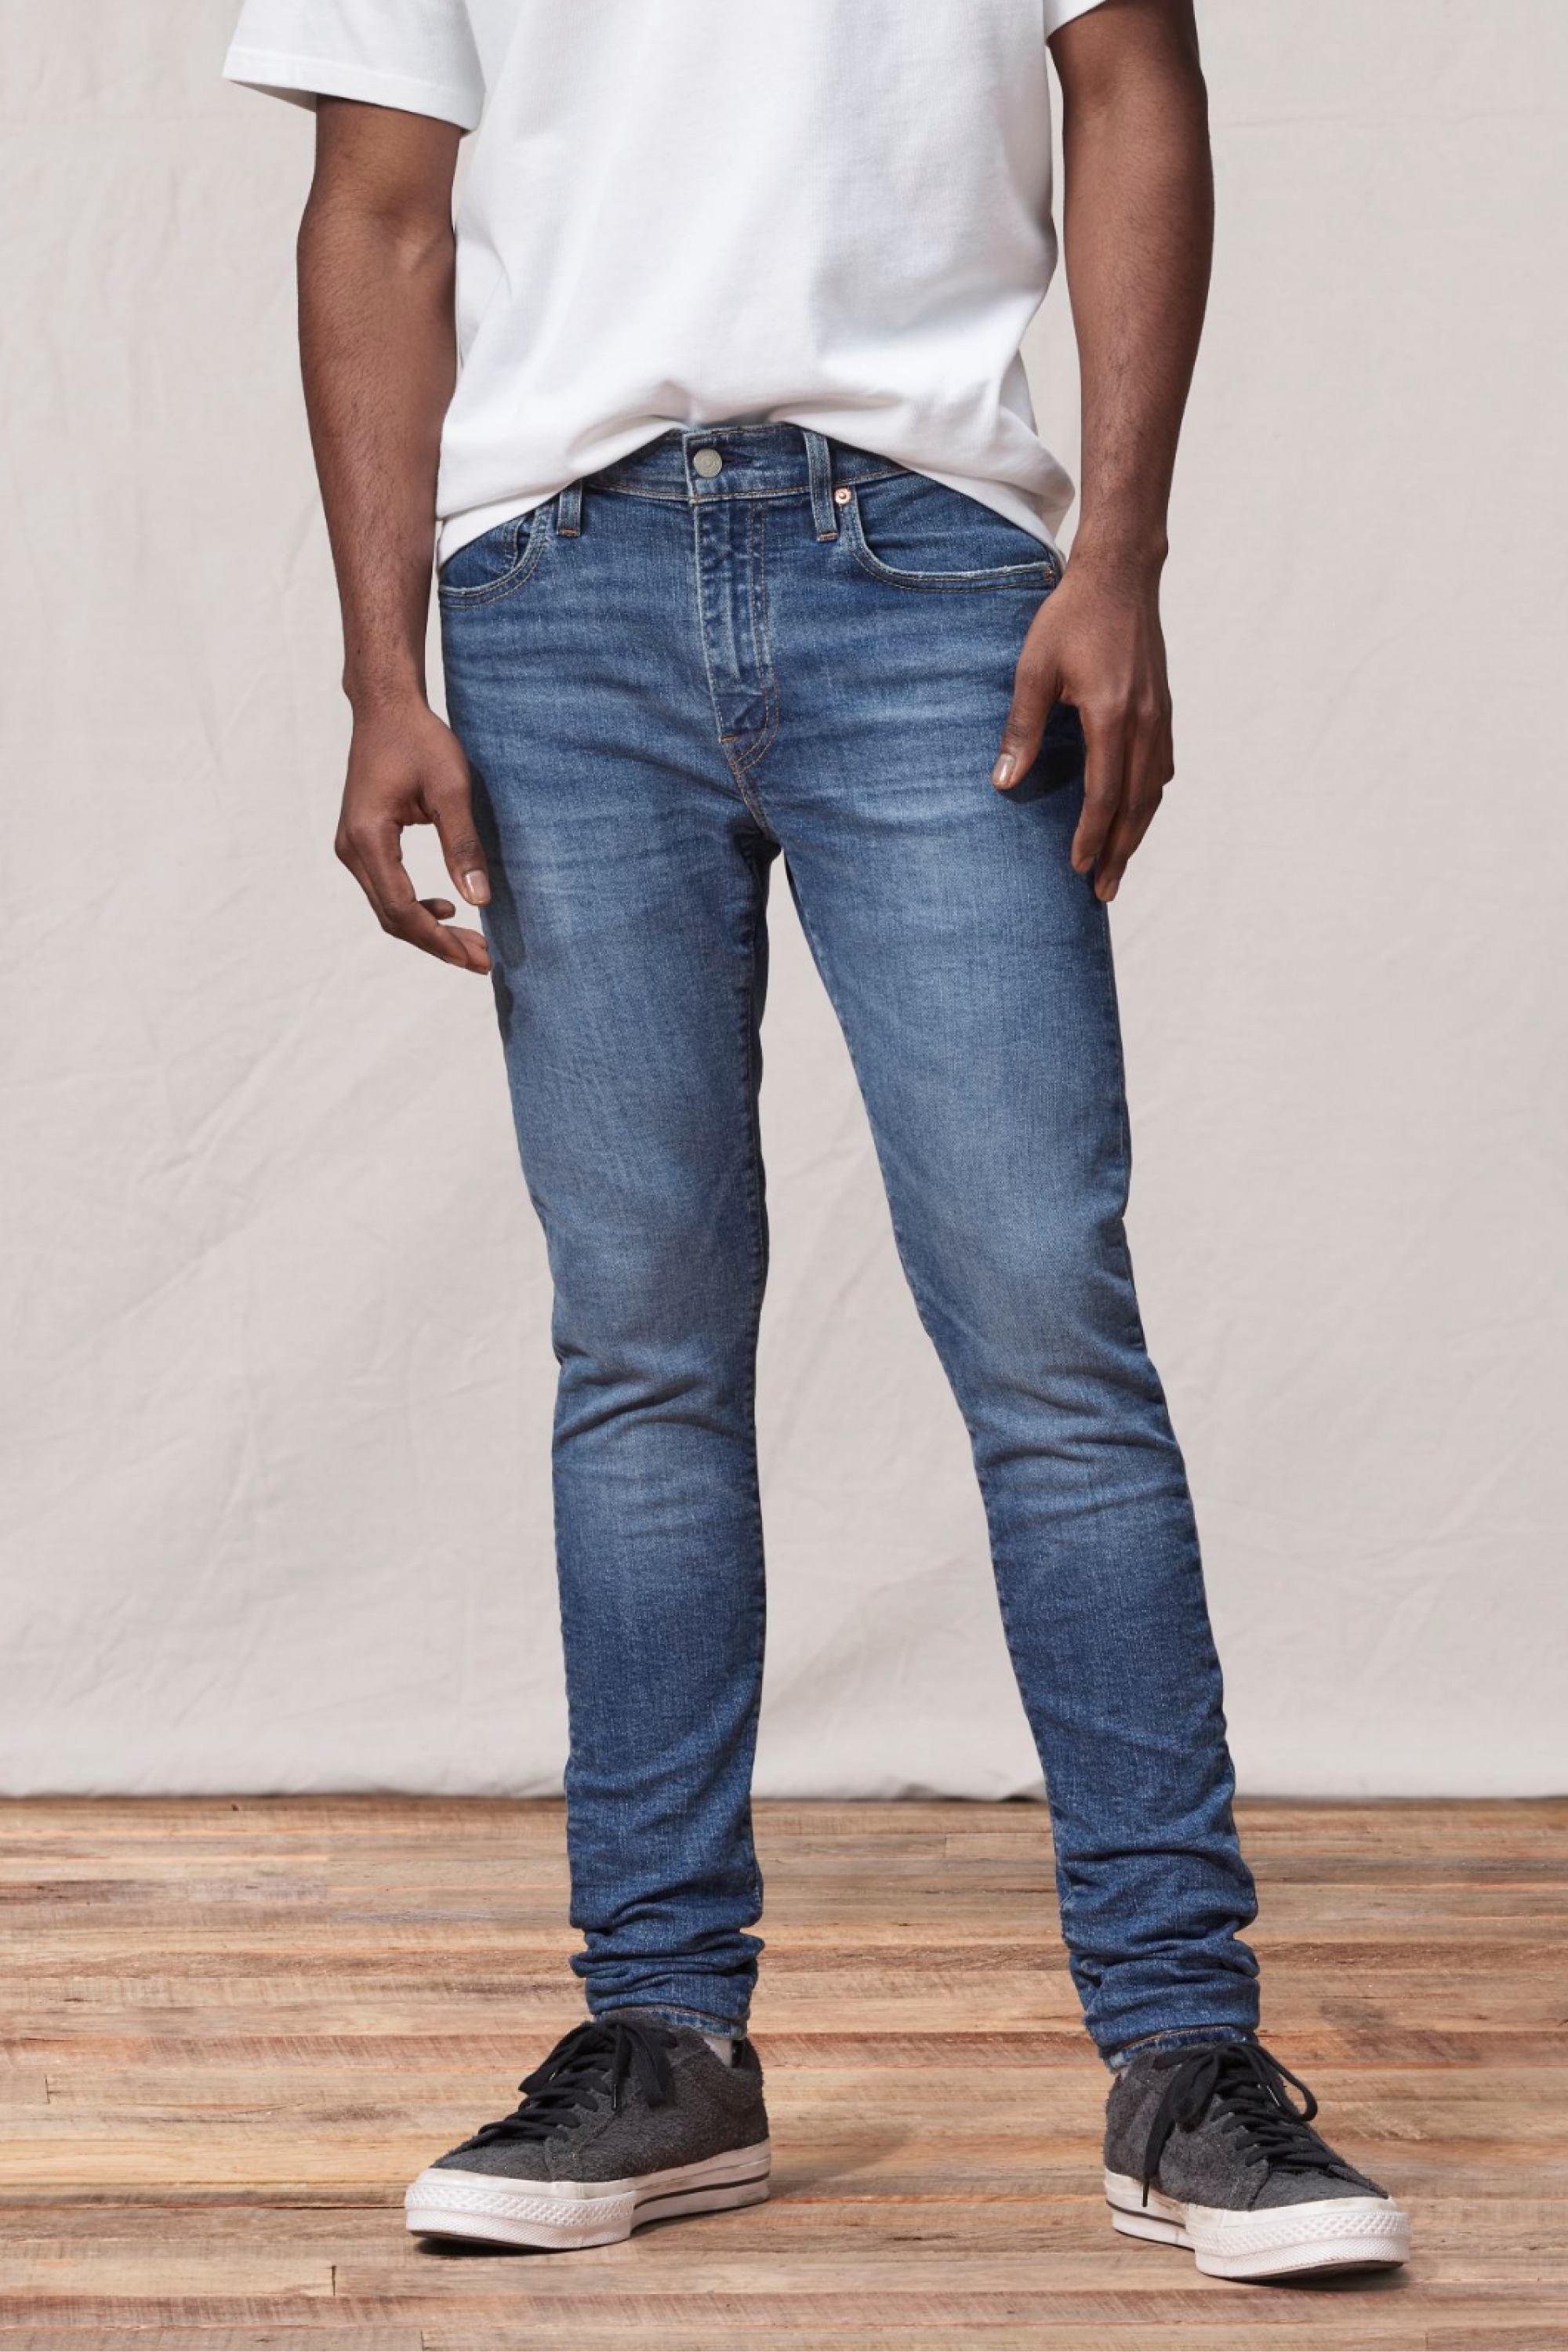 types of levi jeans